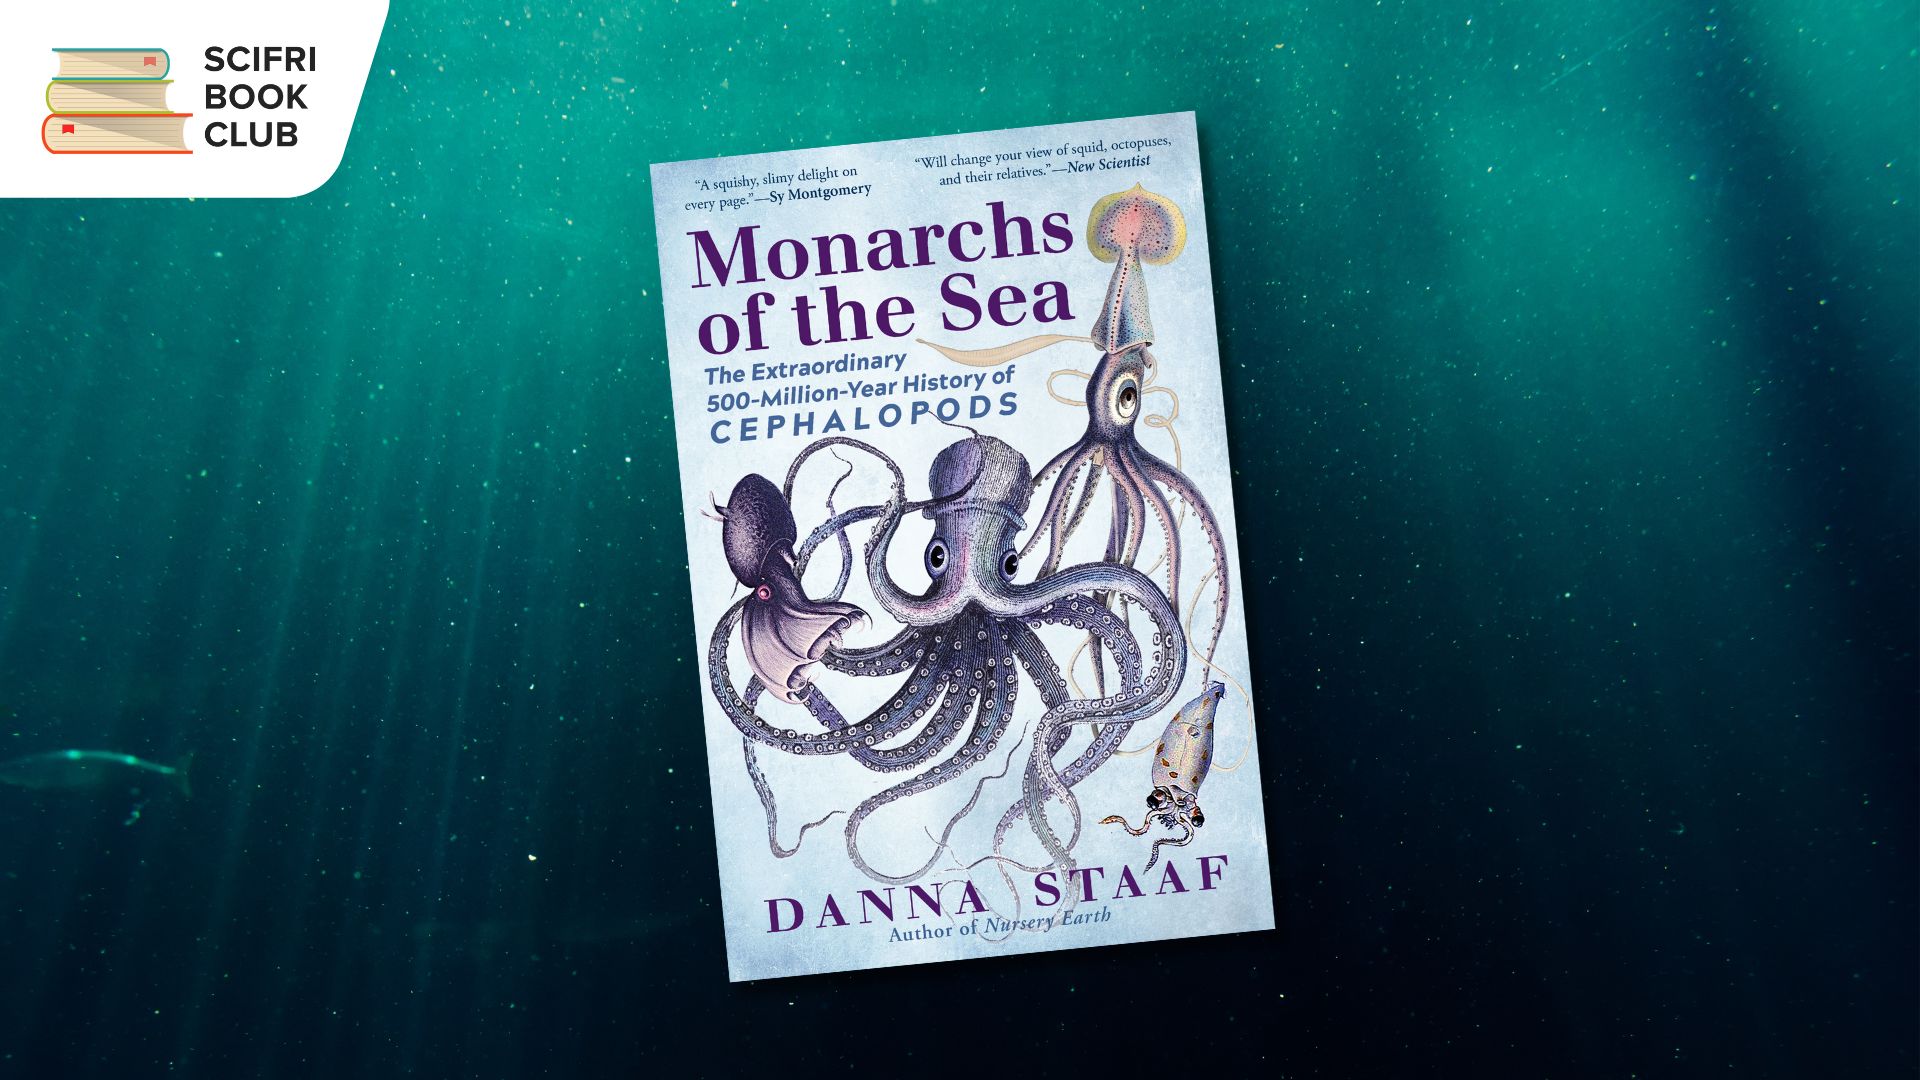 The cover of MONARCHS OF THE SEA by Danna Staff, which features four different illustrations of squid and octopuses. The background is light filtering through a dark green ocean with bubbles and ocean matter floating around.